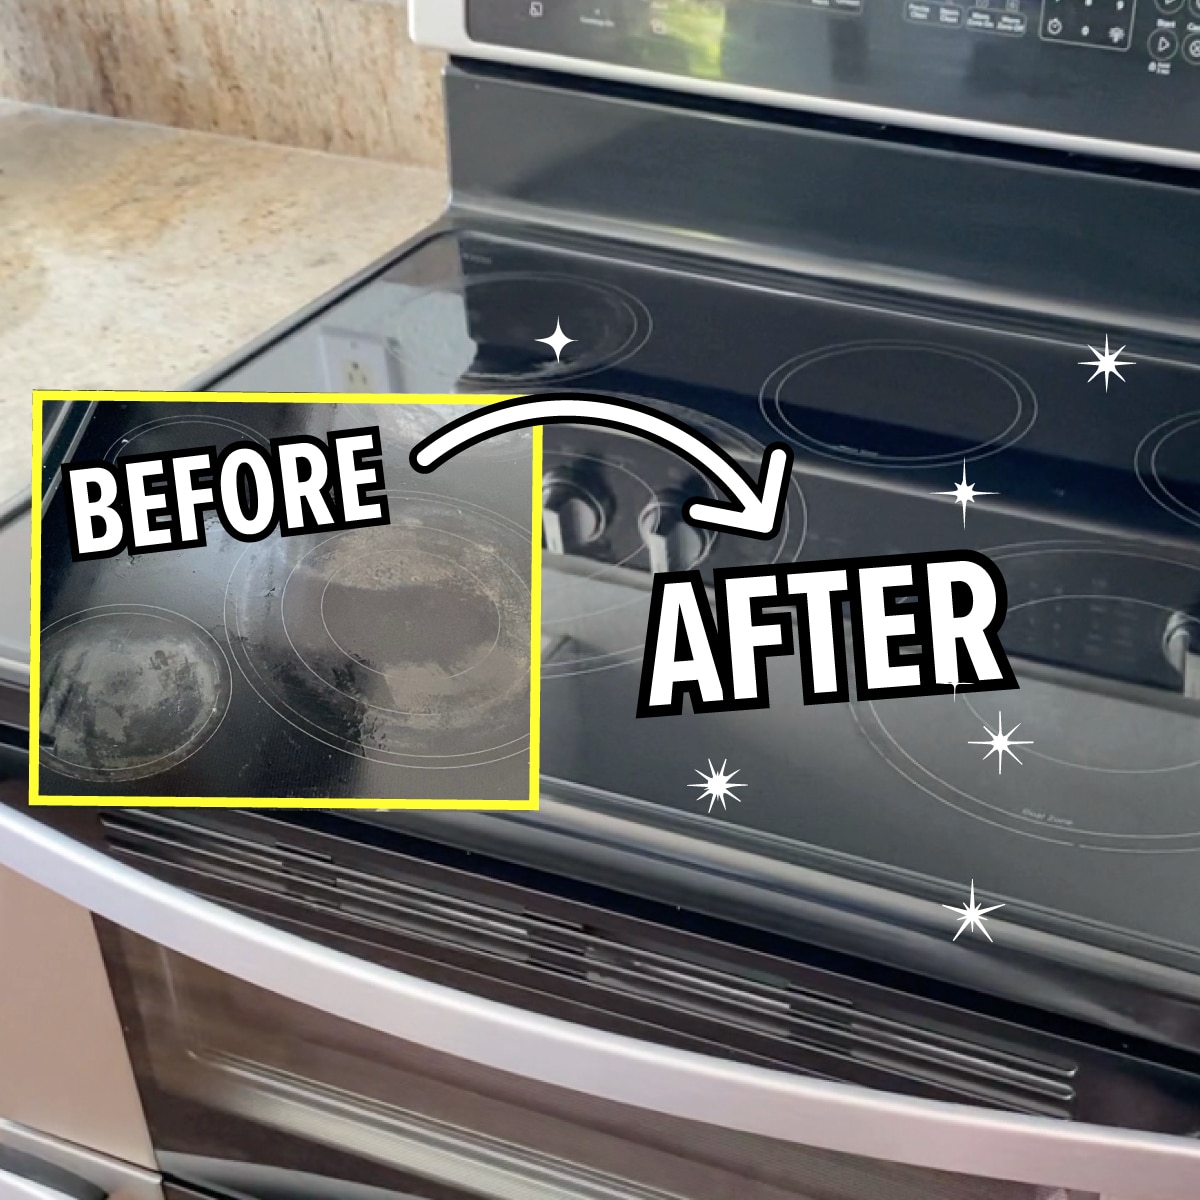 How To Buy Best Glass Stovetop Cleaner